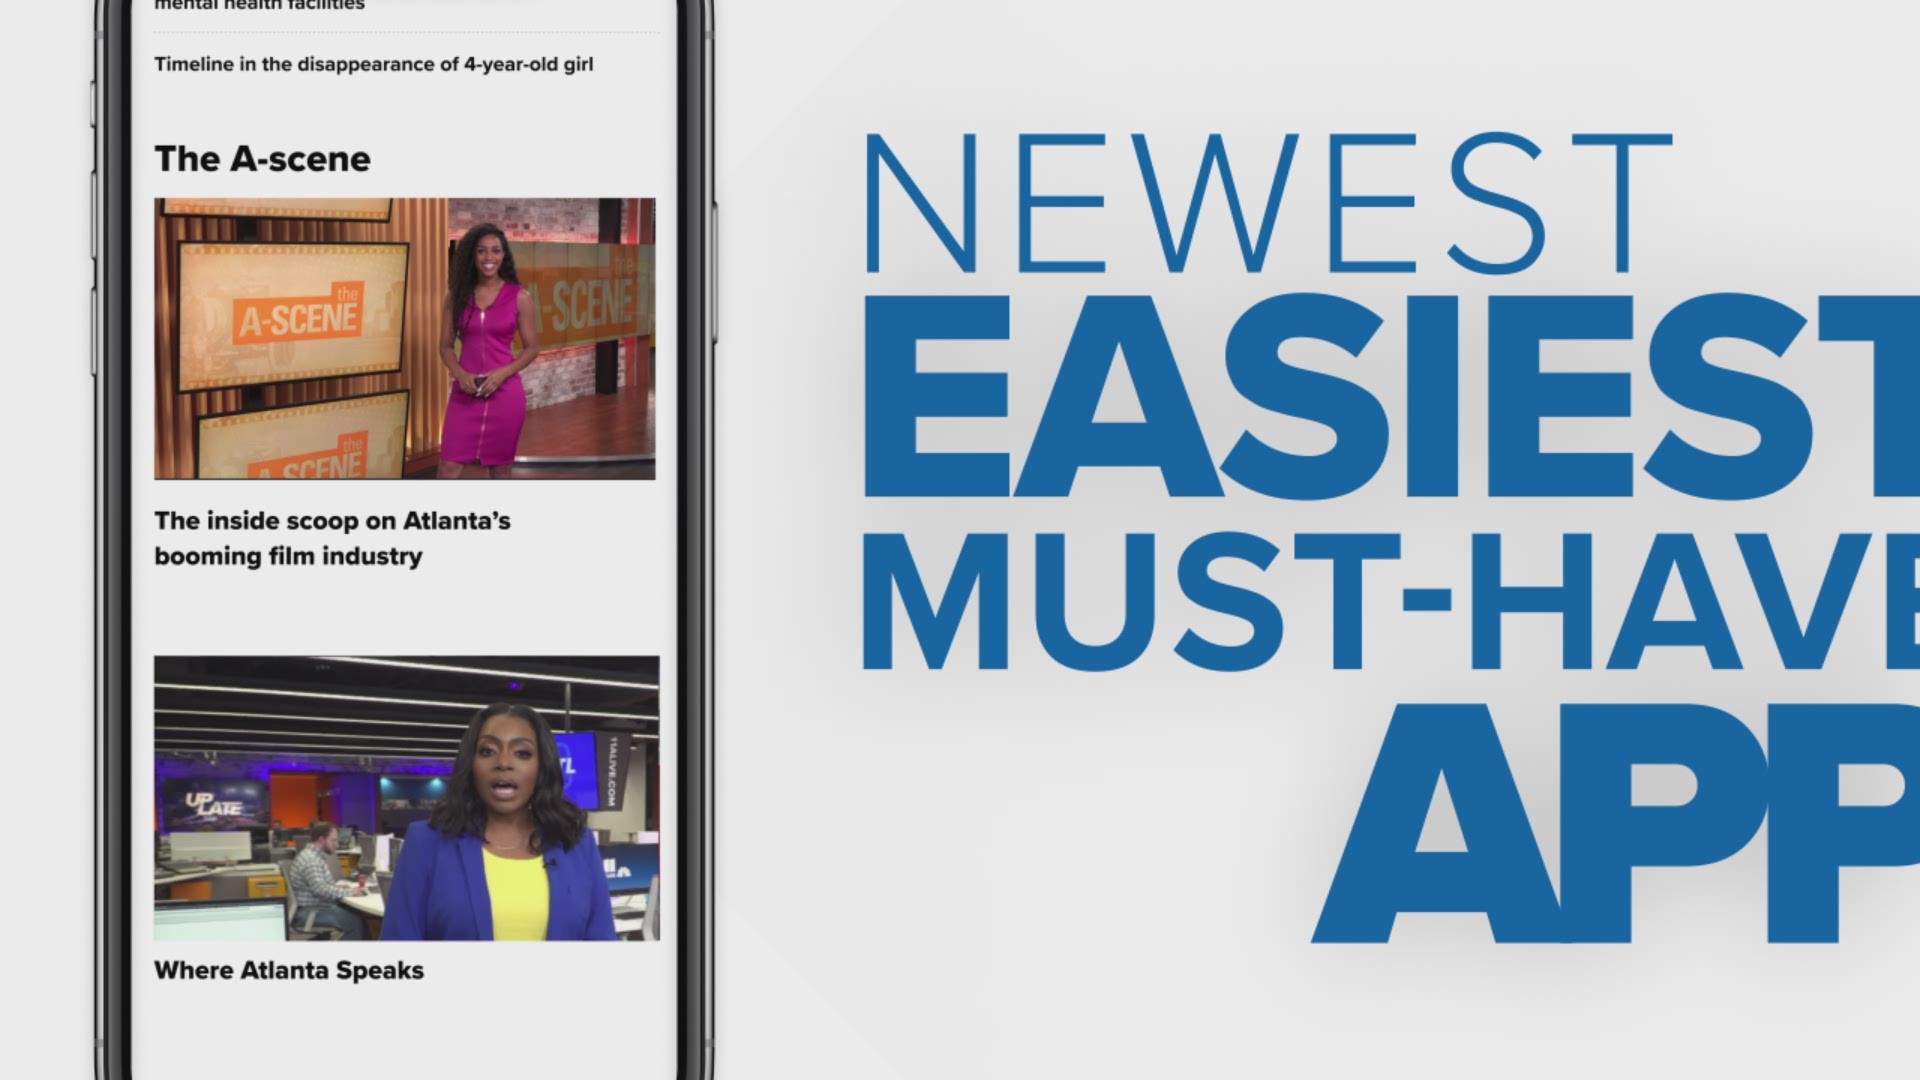 On our new app, it’s easy to follow your favorite topics, check the local forecast and watch live video.